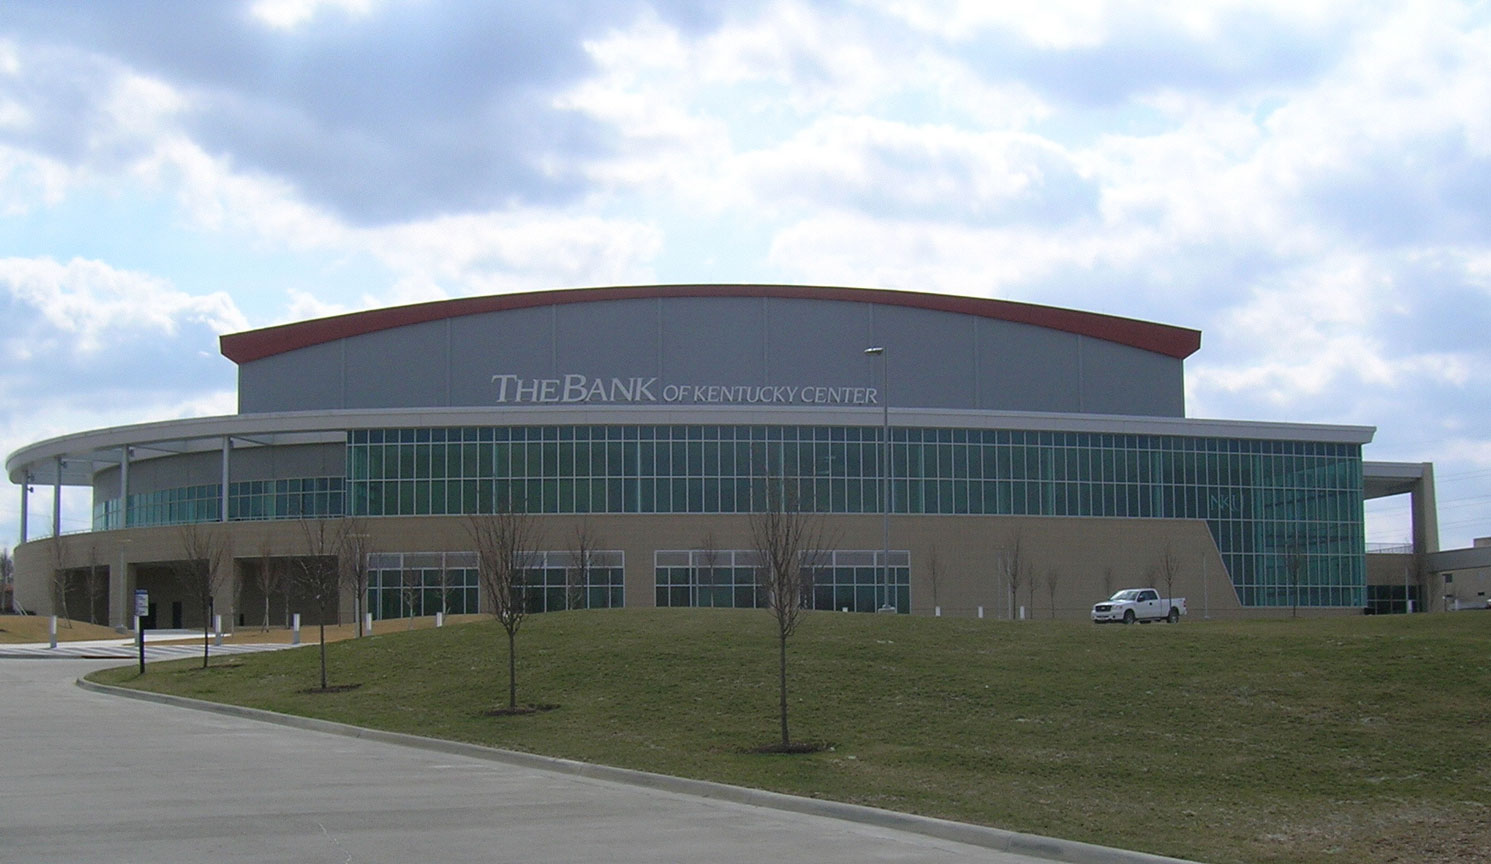 Concert, Event, and Basketball Arena Building